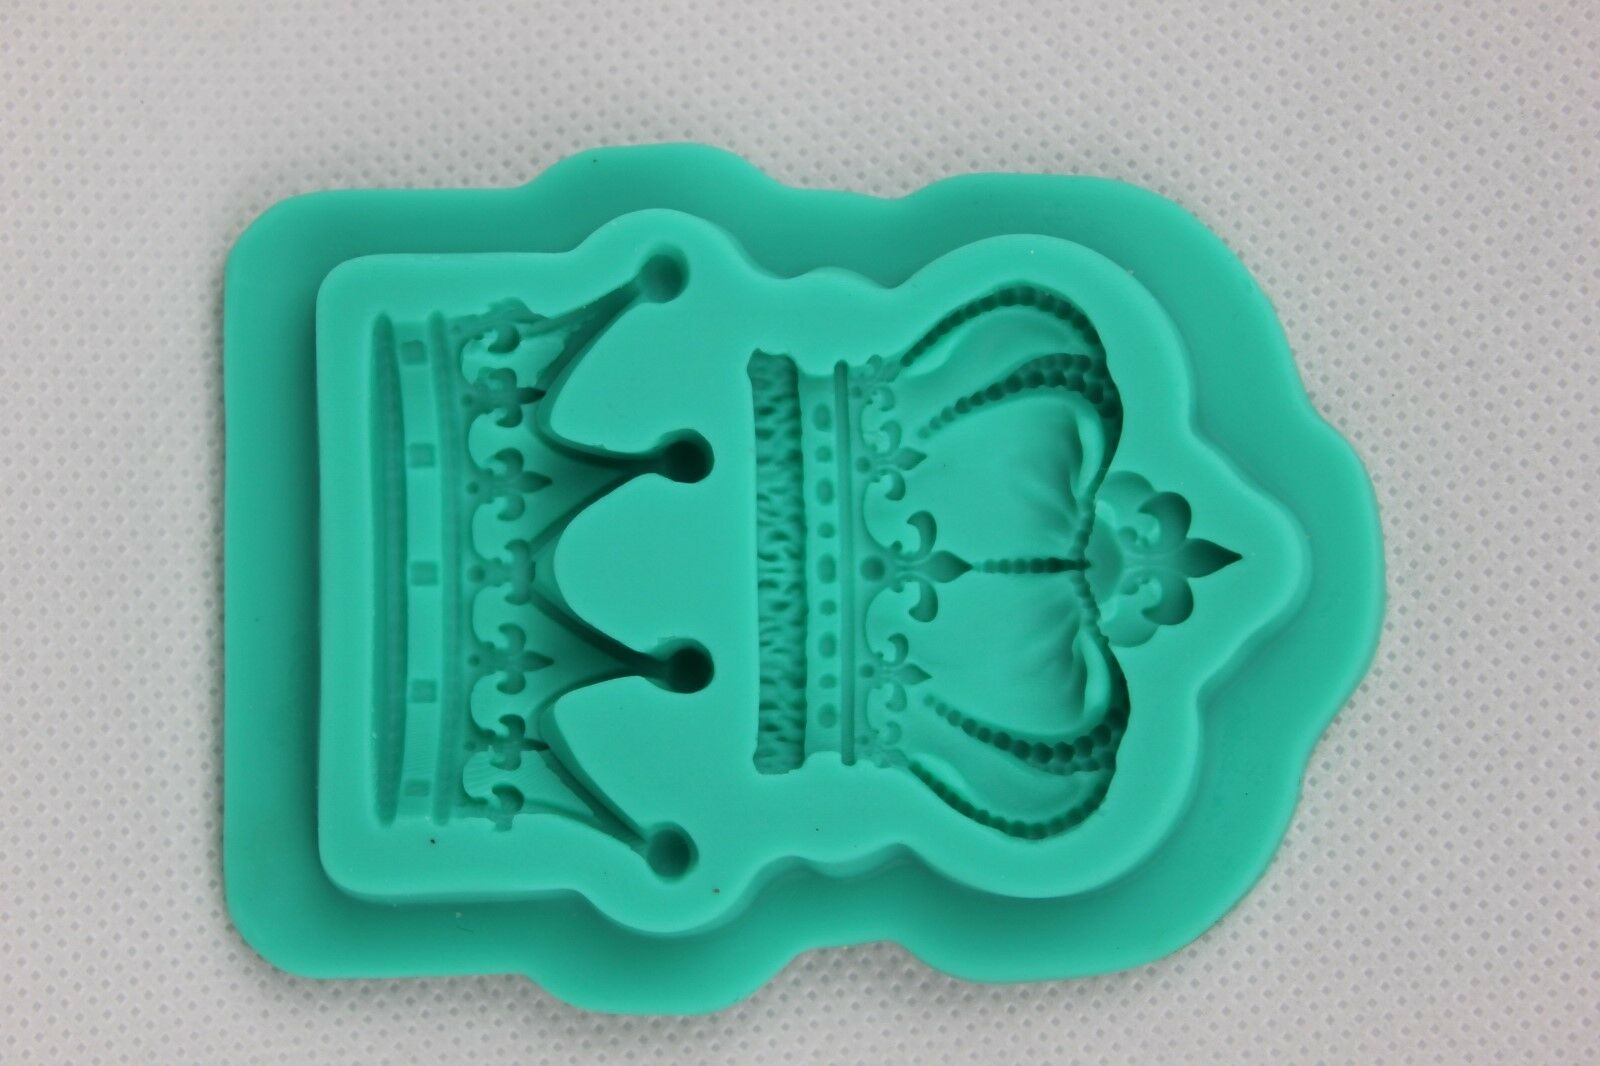 attachment-https://www.cupcakeaddicts.co.uk/wp-content/uploads/imported/3/Crown-Royal-baby-Prince-Princess-Silicone-Mould-Cake-Chocolate-Icing-Bake-Decor-323147589533-4.jpg